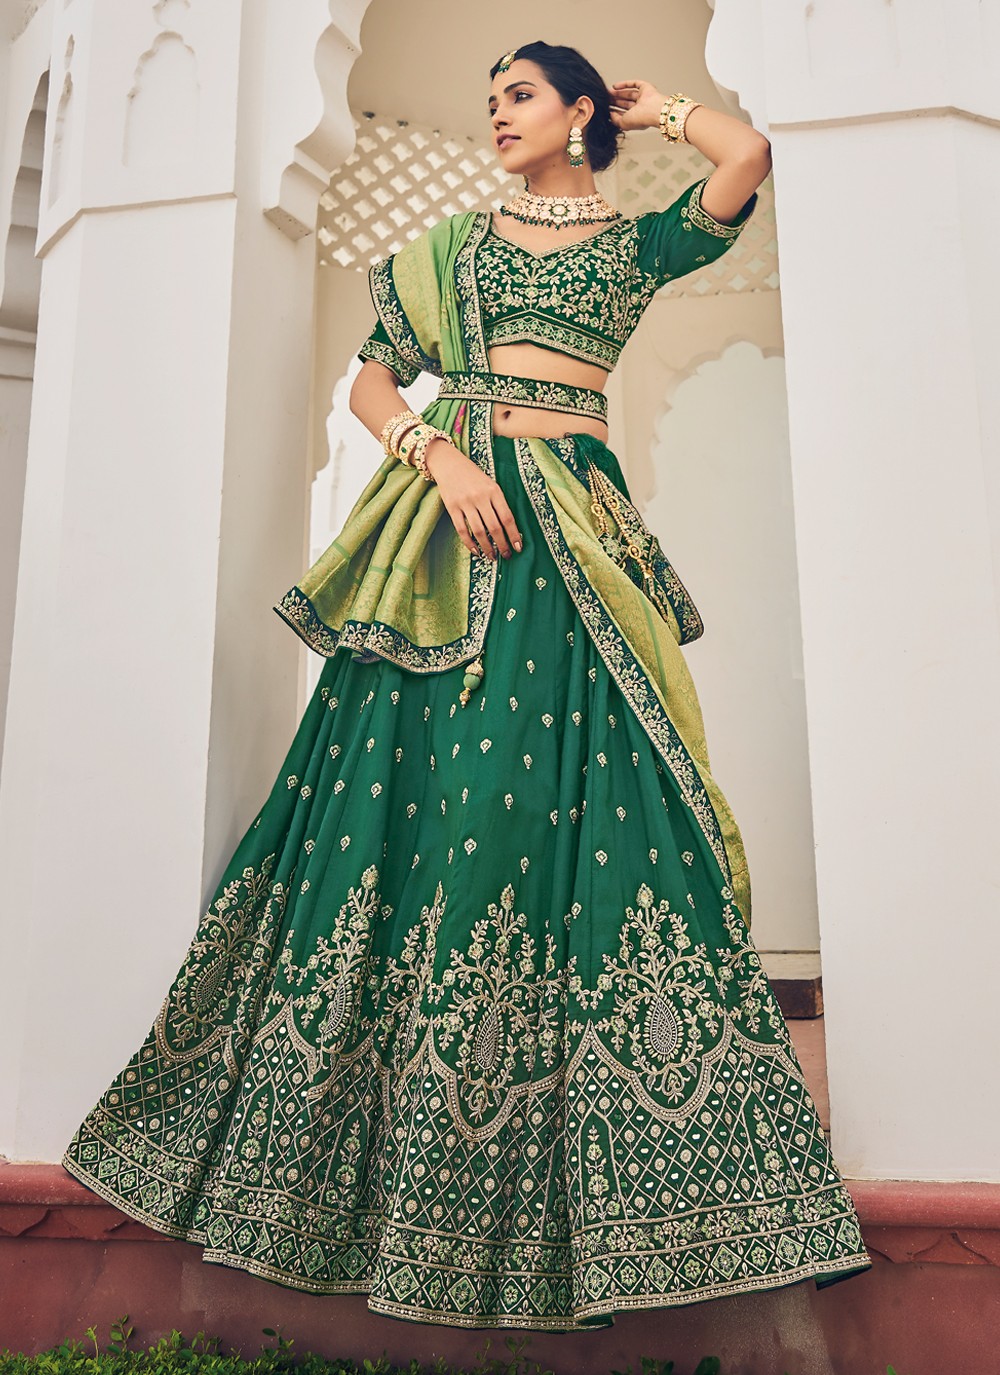 DARK GREEN VELVET WITH EMBROIDERY WORK & CAN CAN BRIDAL LEHENGA CHOLI  @Indian Couture